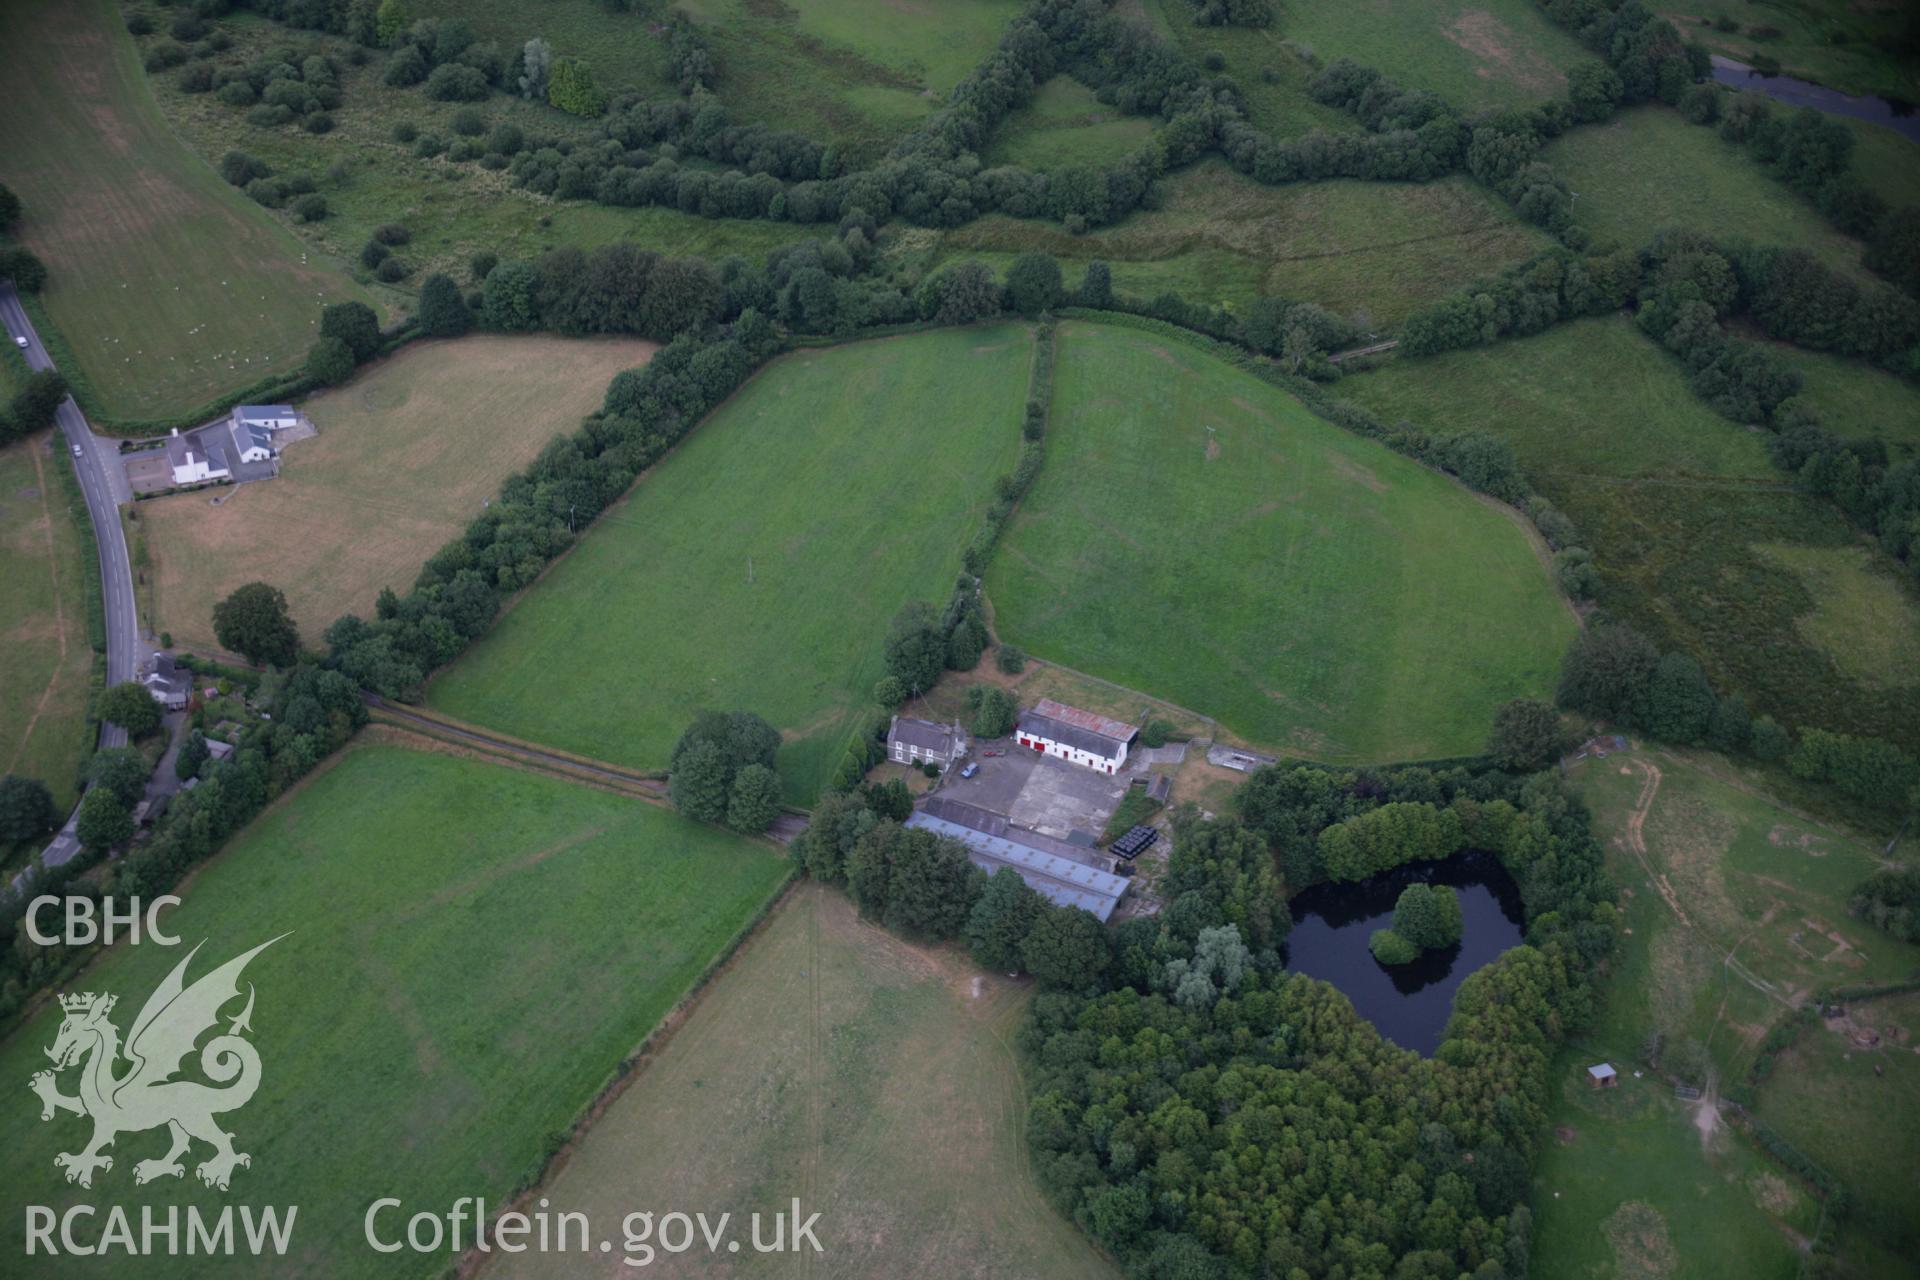 RCAHMW colour oblique aerial photograph of Llanio Roman Fort. Taken on 27 July 2006 by Toby Driver.